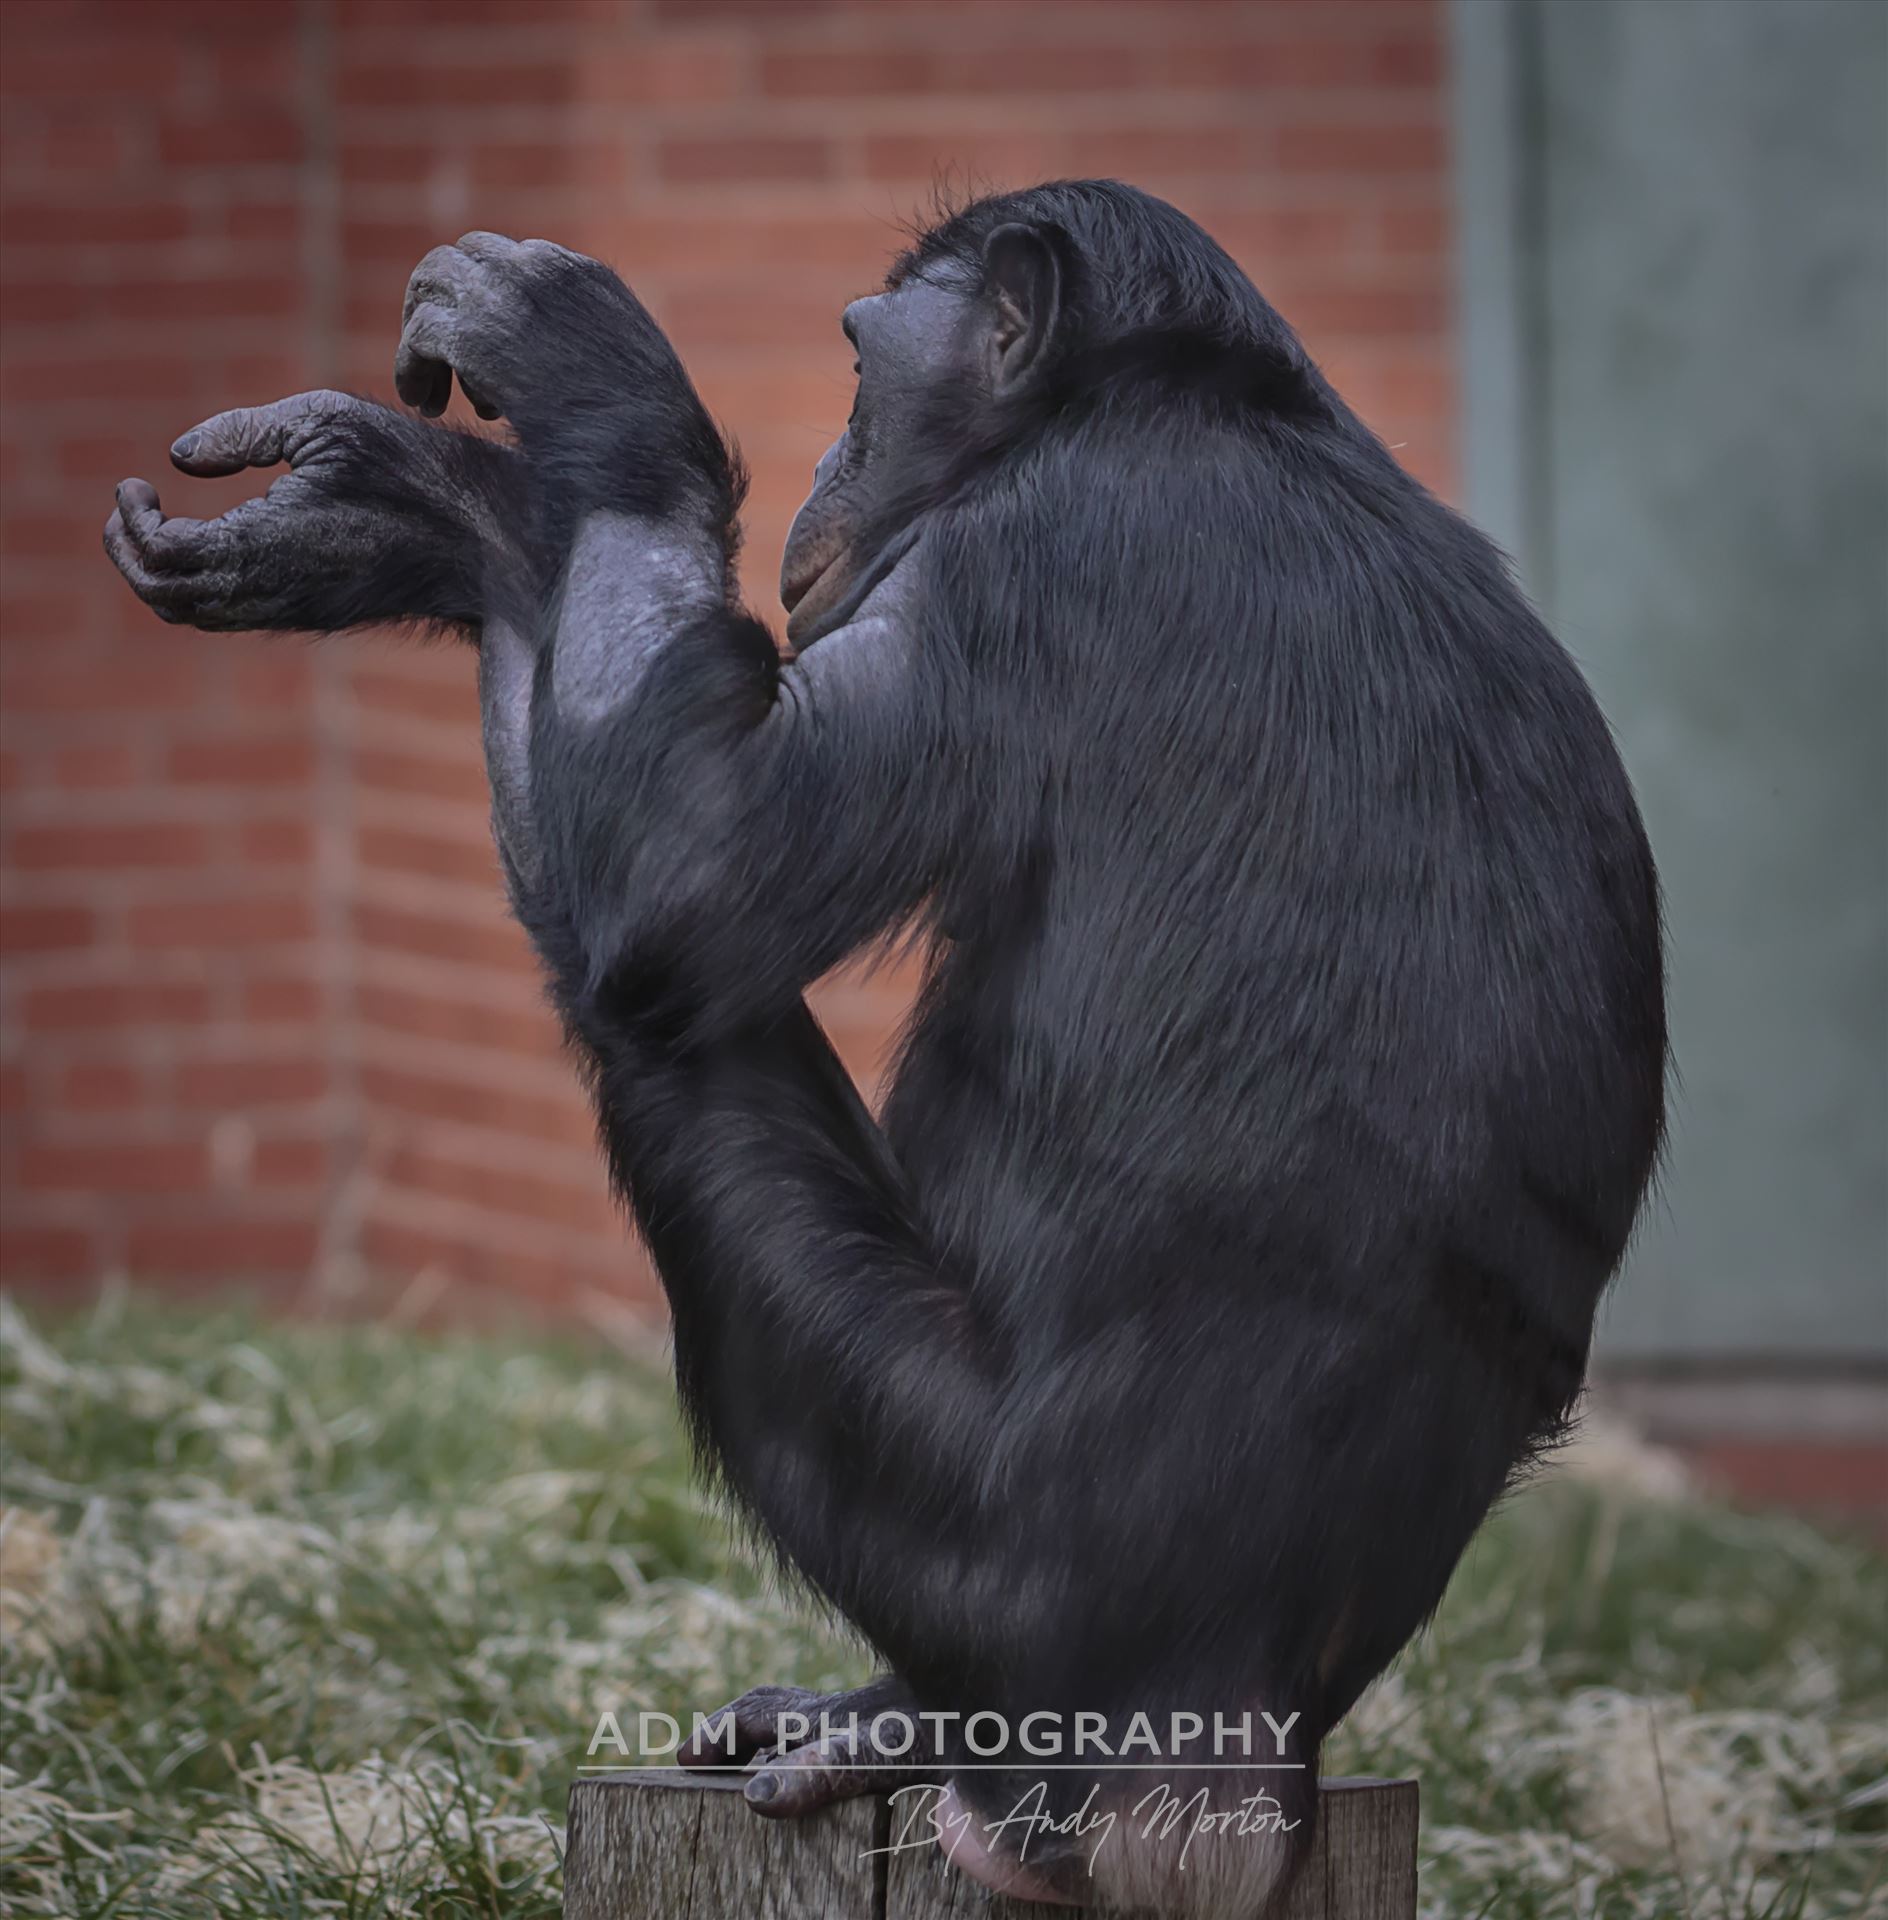 Bonobo Chimpanzee The taxonomical genus Pan consists of two extant species: the common chimpanzee and the bonobo. Together with humans, gorillas and orangutans they are part of the family Hominidae. by Andy Morton Photography